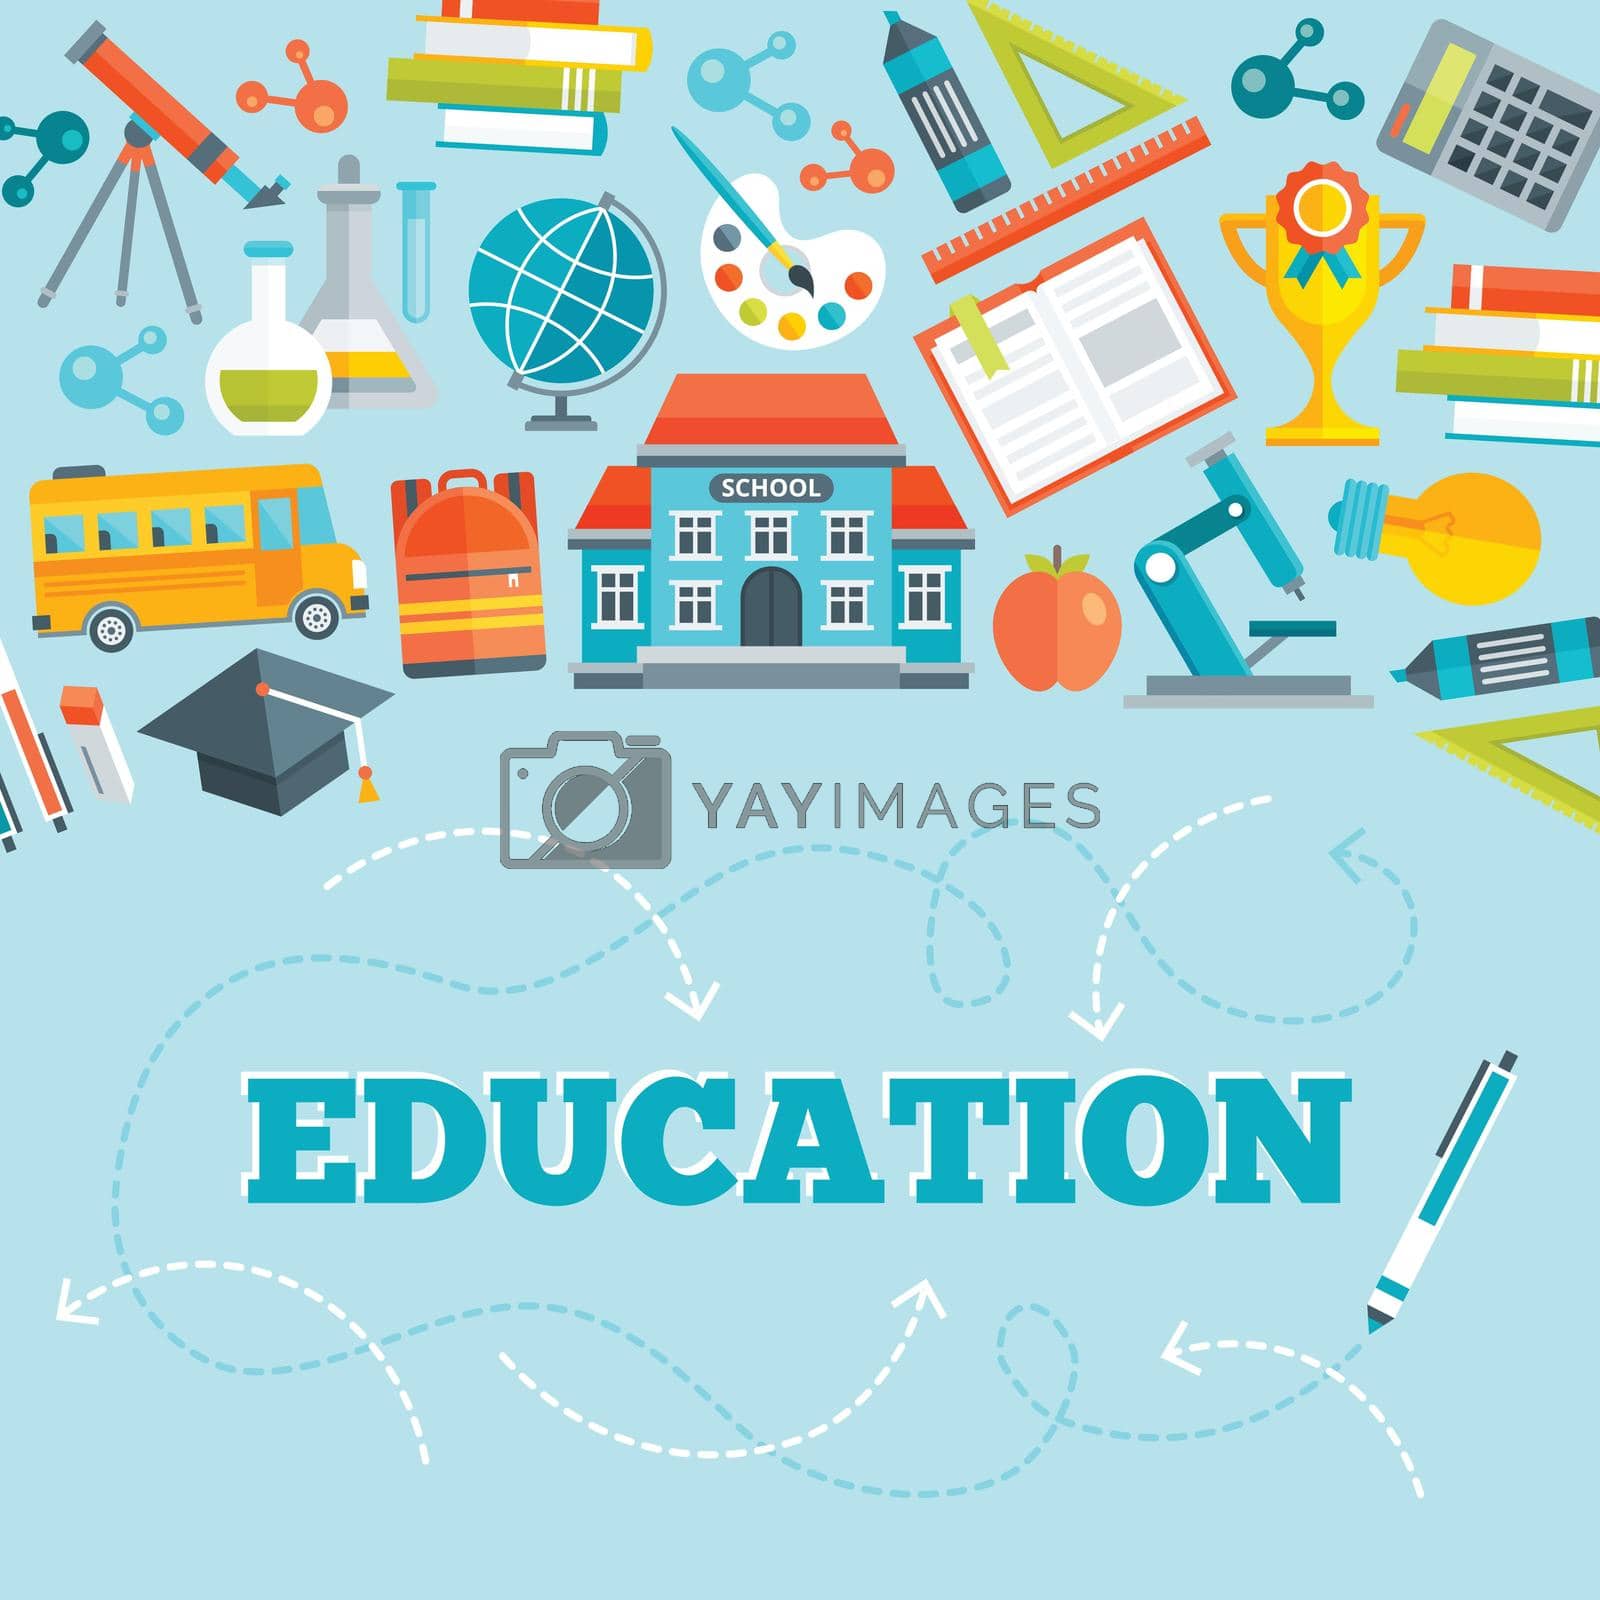 Education flat design with school building learning tools bus and inscription below on blue background vector illustration